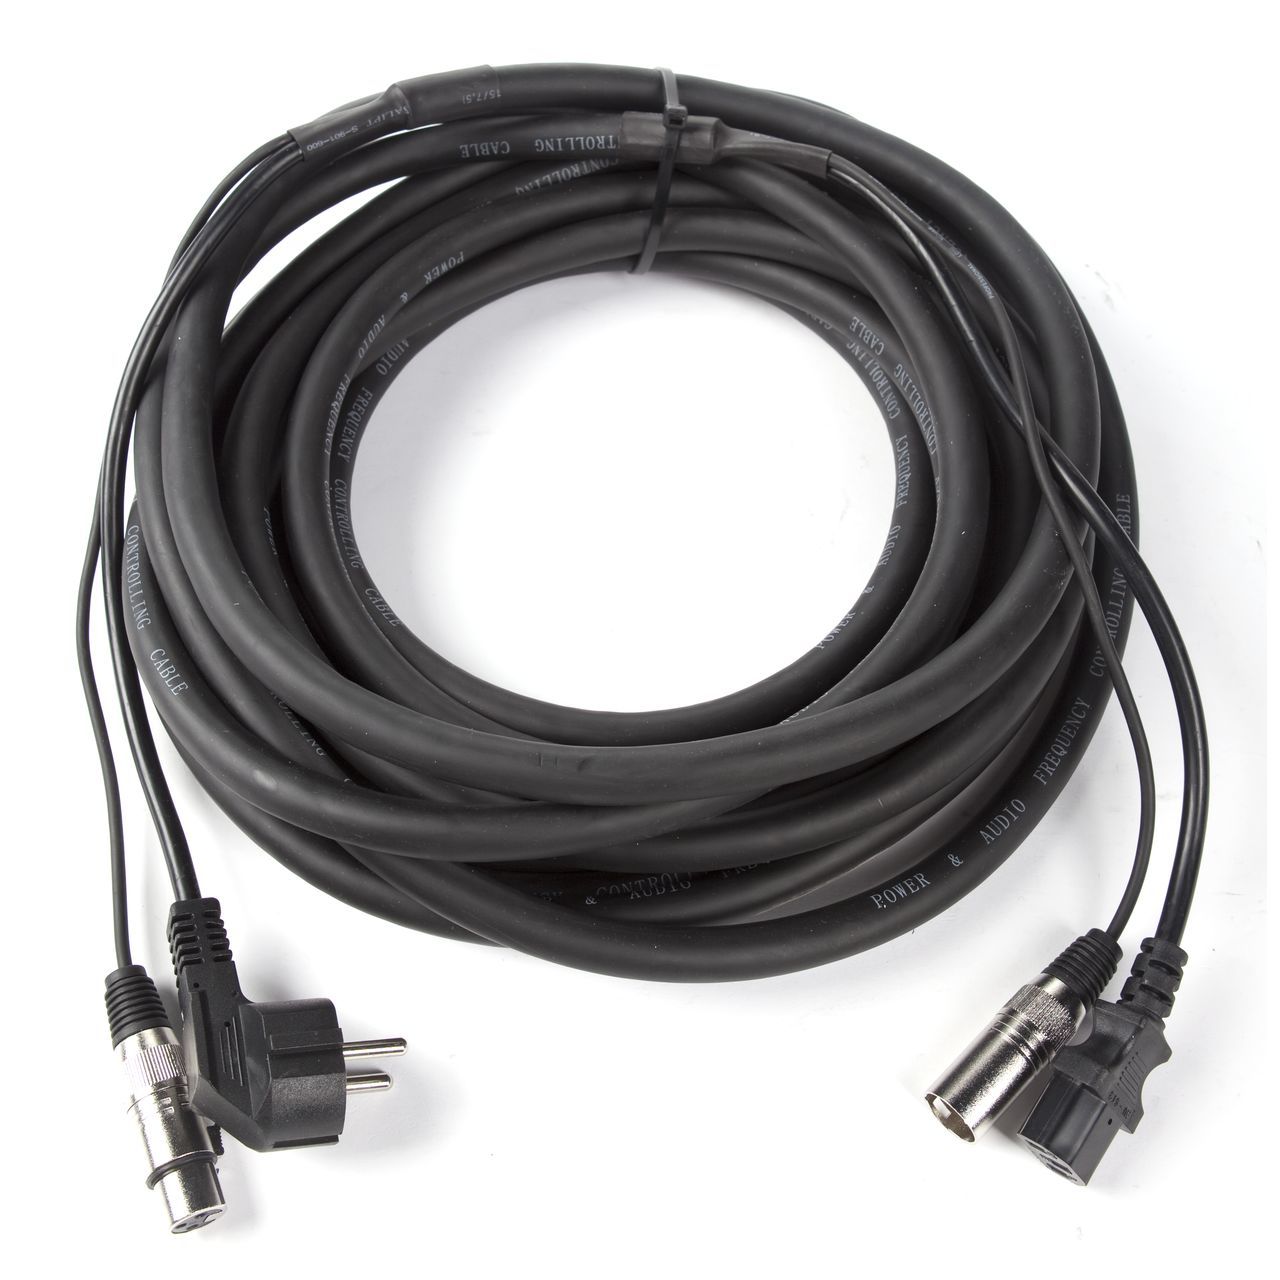 Adam Hall Cables 8101 PSAX 1500 